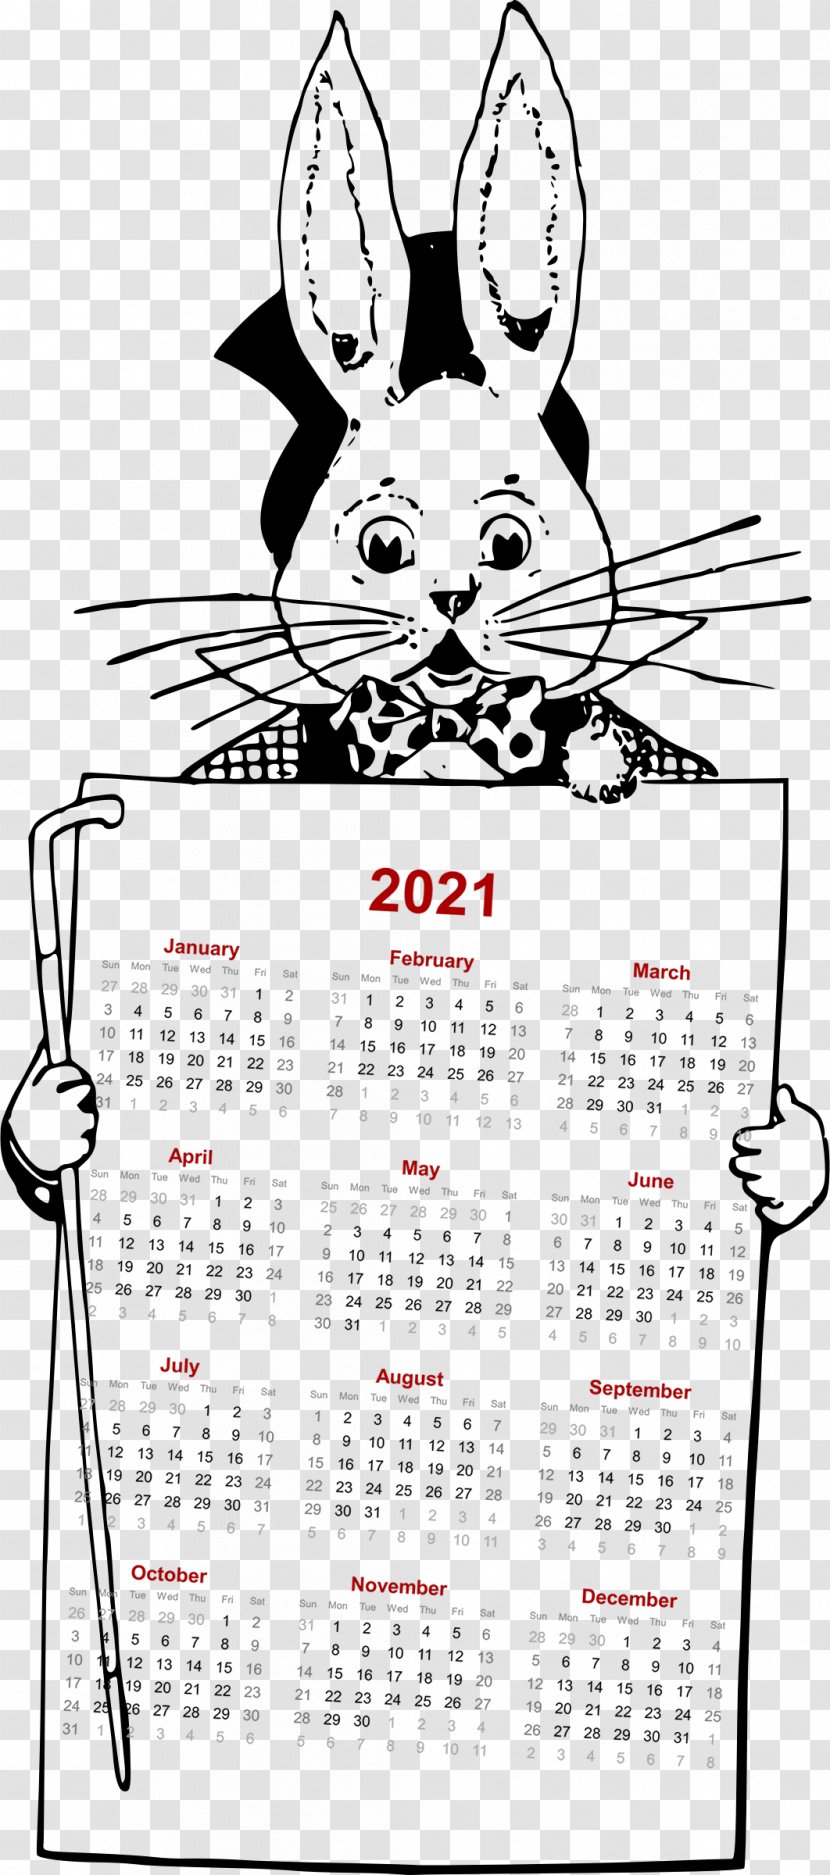 2021 Cartoon Calendar - Easter Bunny - Ratbbit Yearly Printable COthers Transparent PNG